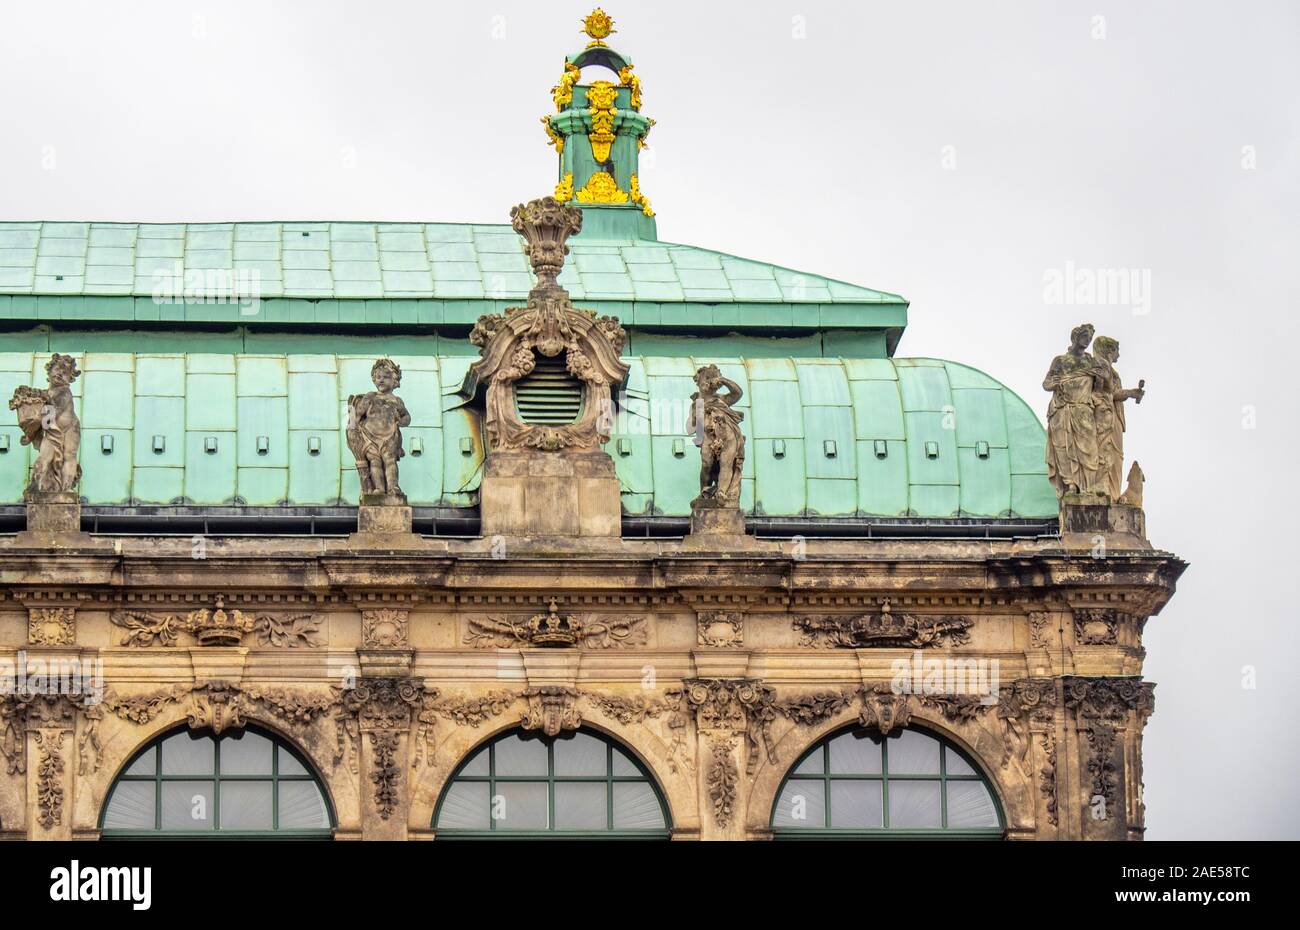 Gold gilded sculpture and stone statues on the roof of exhibition gallery building in Zwinger Altstadt Dresden Saxony Germany. Stock Photo